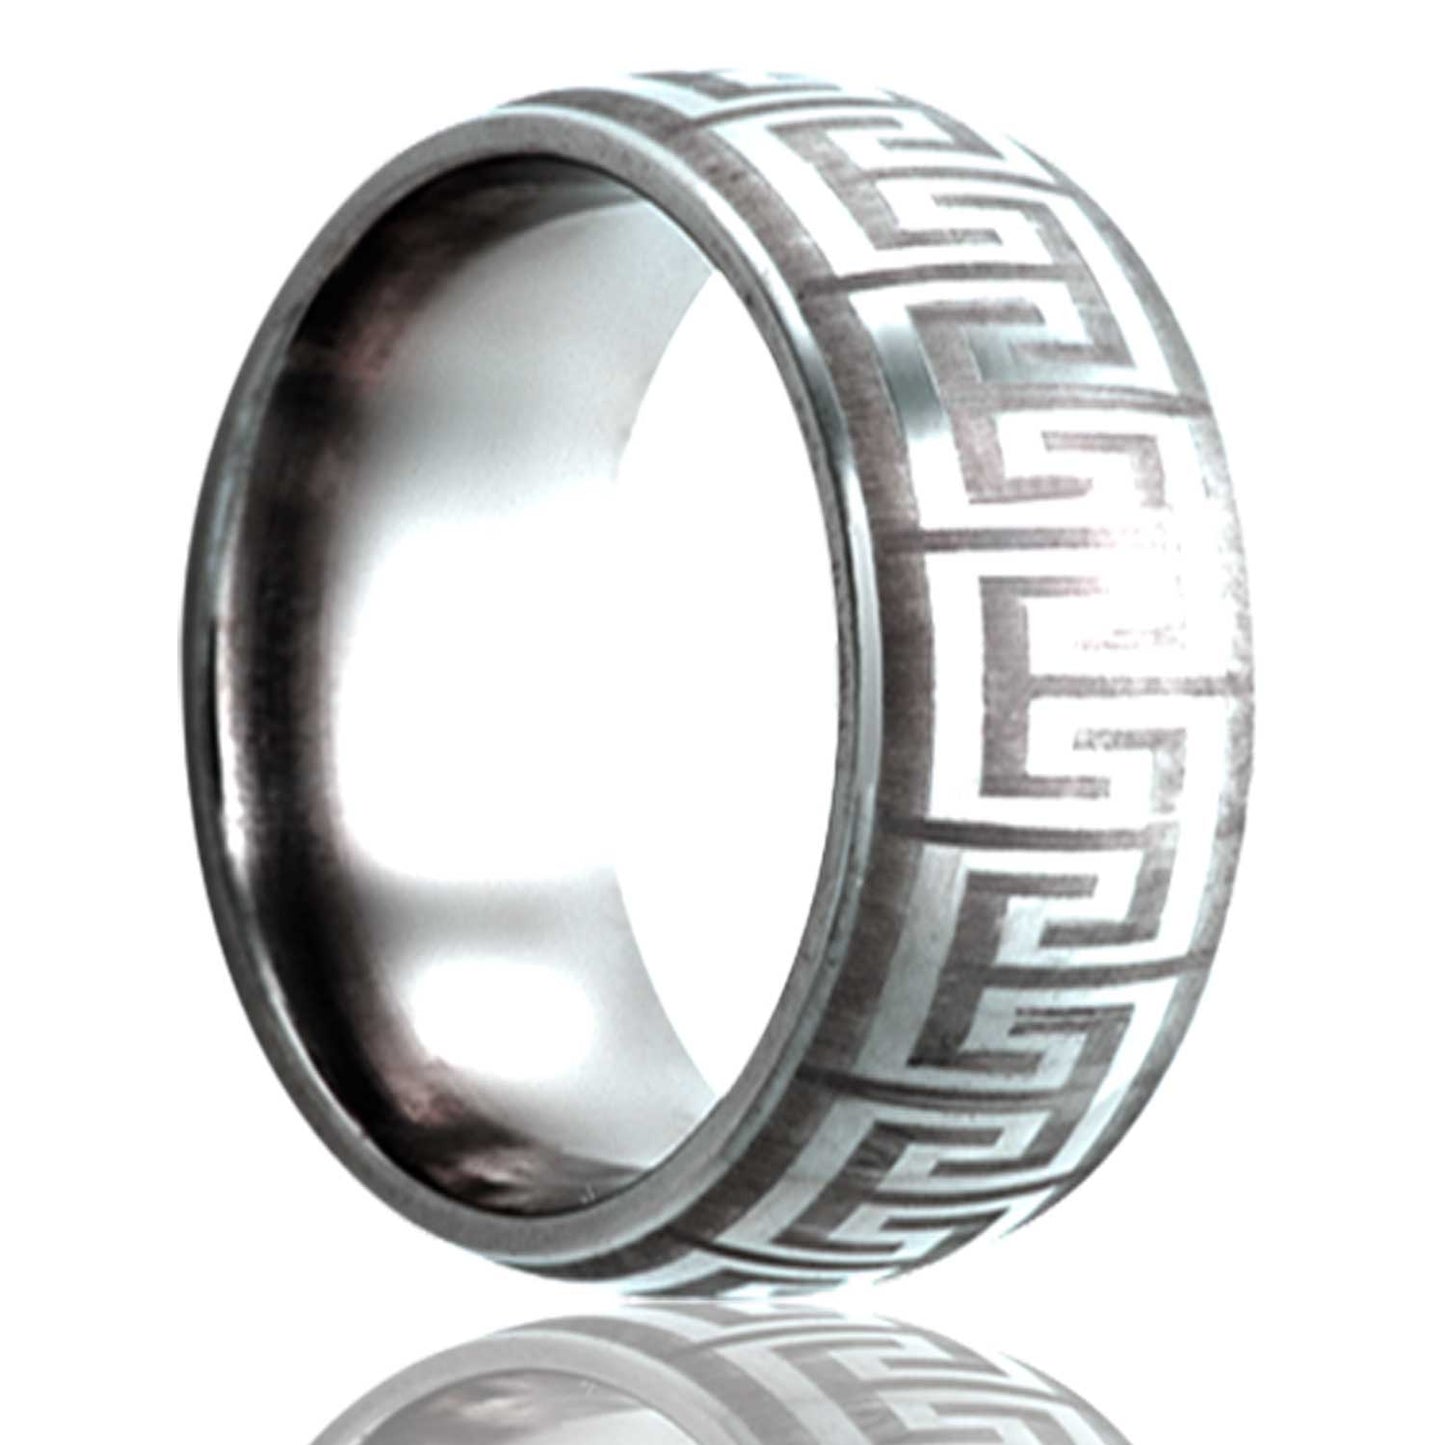 A greek key domed engraved titanium wedding band displayed on a neutral white background.